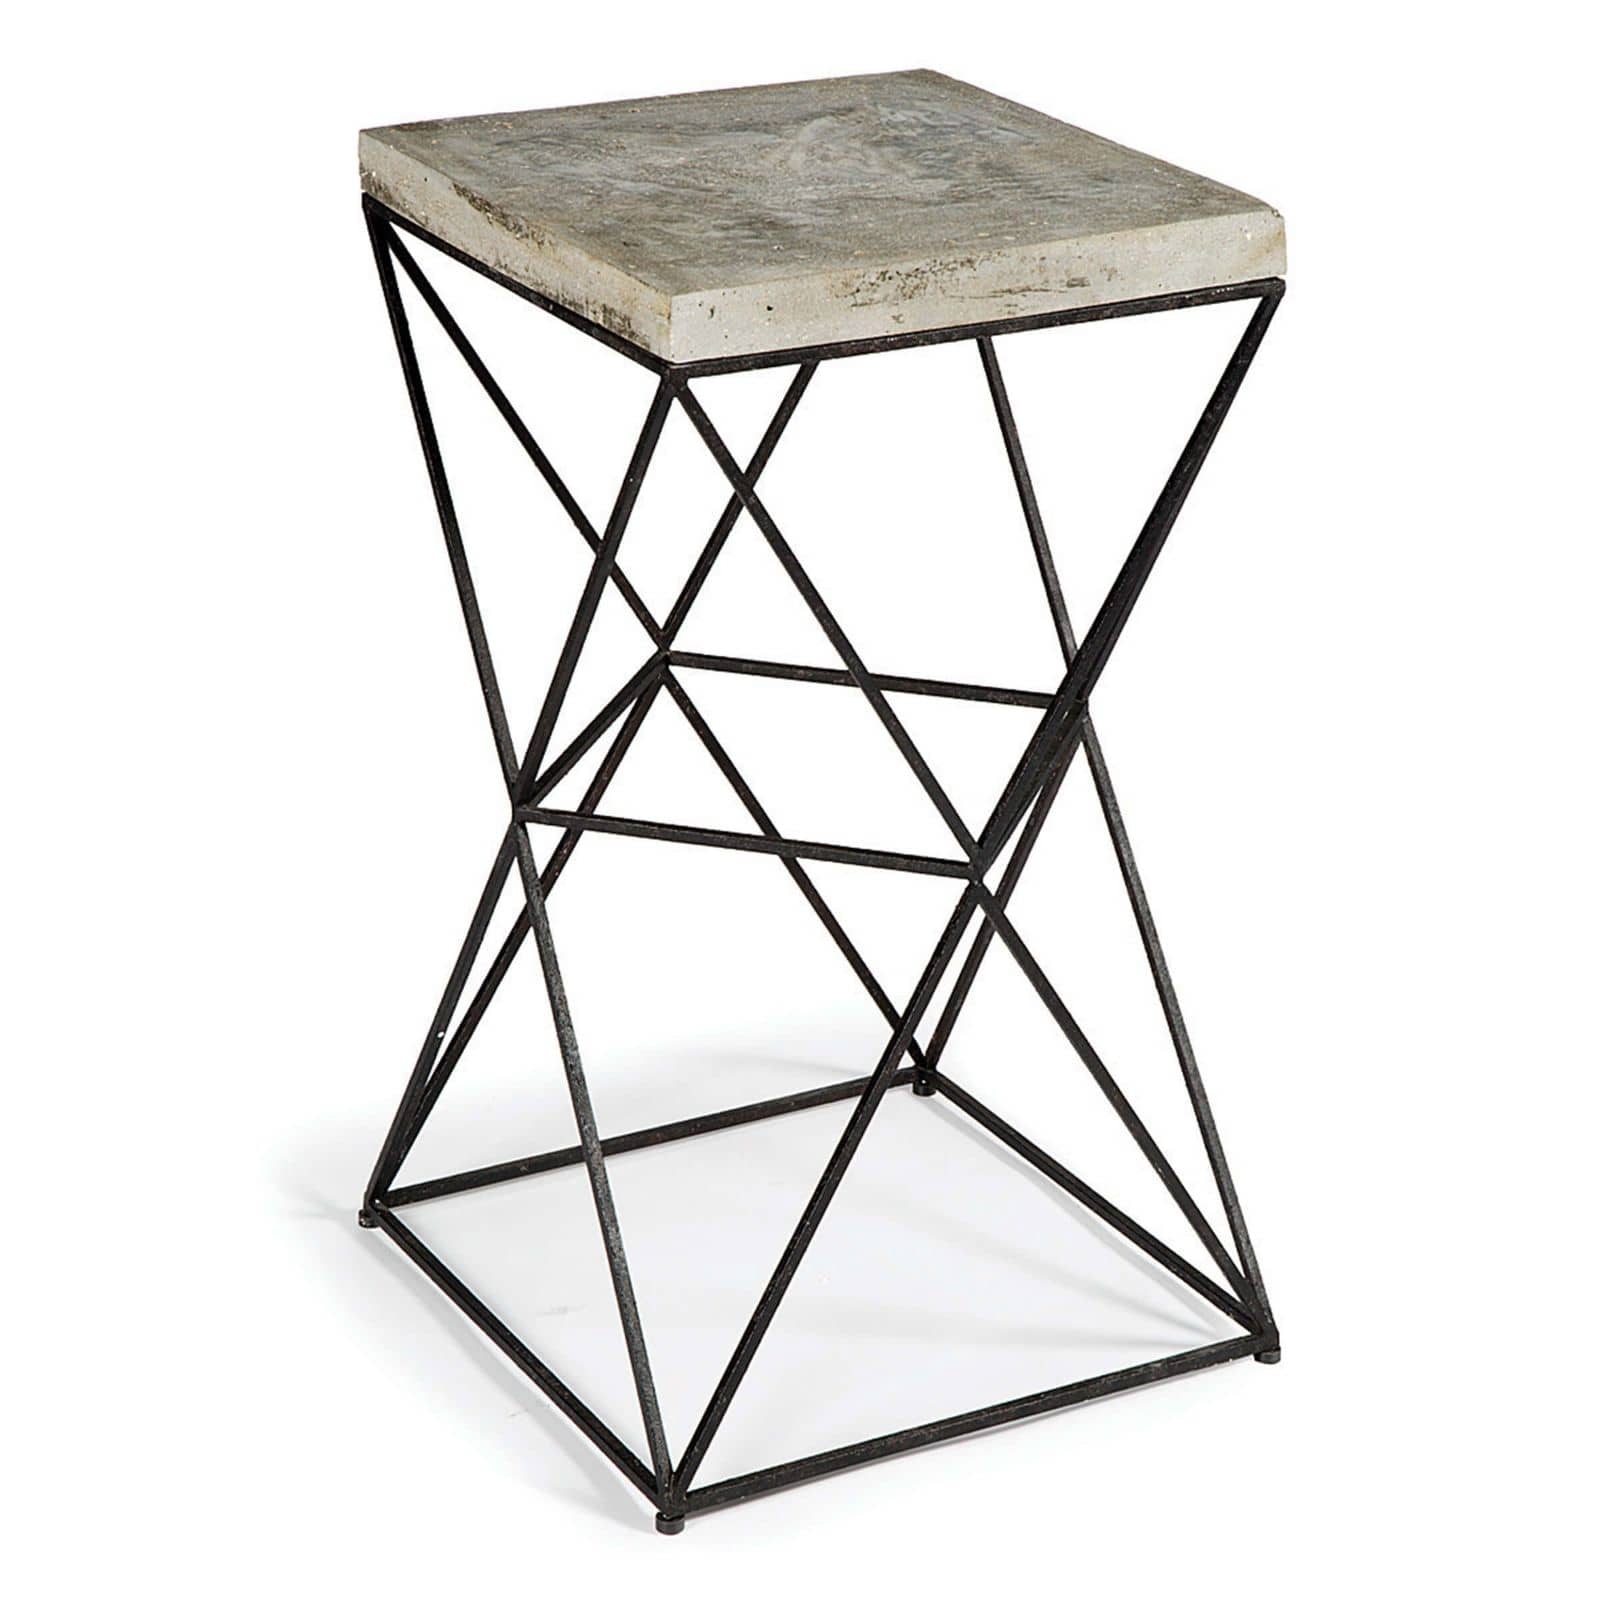 Eames Industrial Loft Metal Concrete Square End Table Modern Nightstands And Bedside Tables